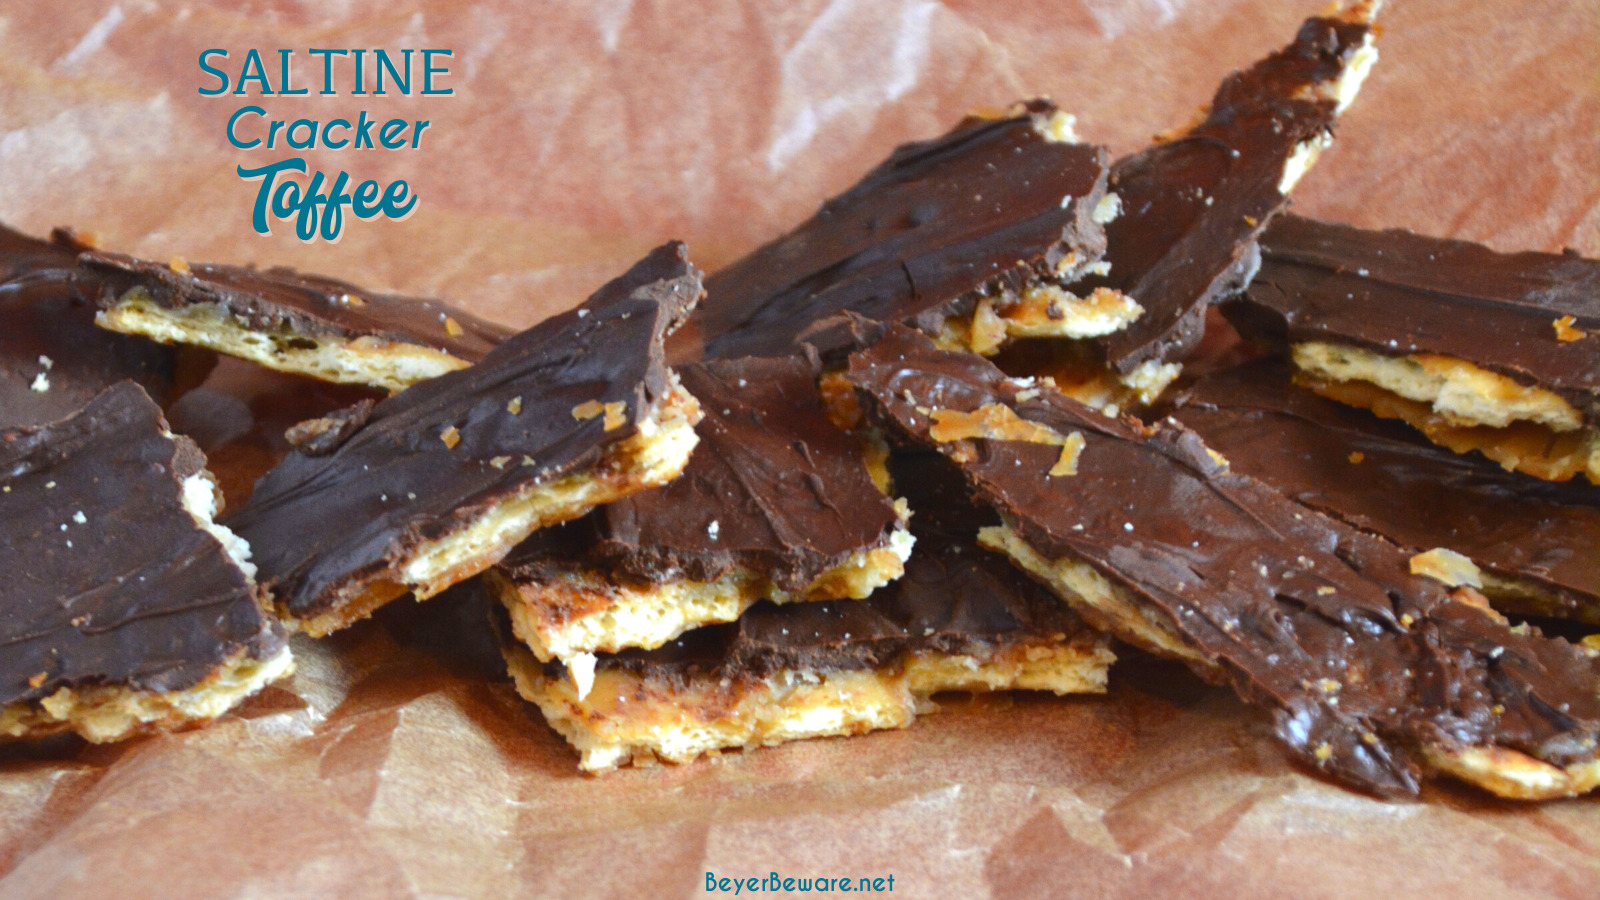 Saltine cracker toffee is a four-ingredient candy recipe that is easy to make with saltine crackers, butter, brown sugar, and chocolate chips and baked quickly before being broken into pieces.